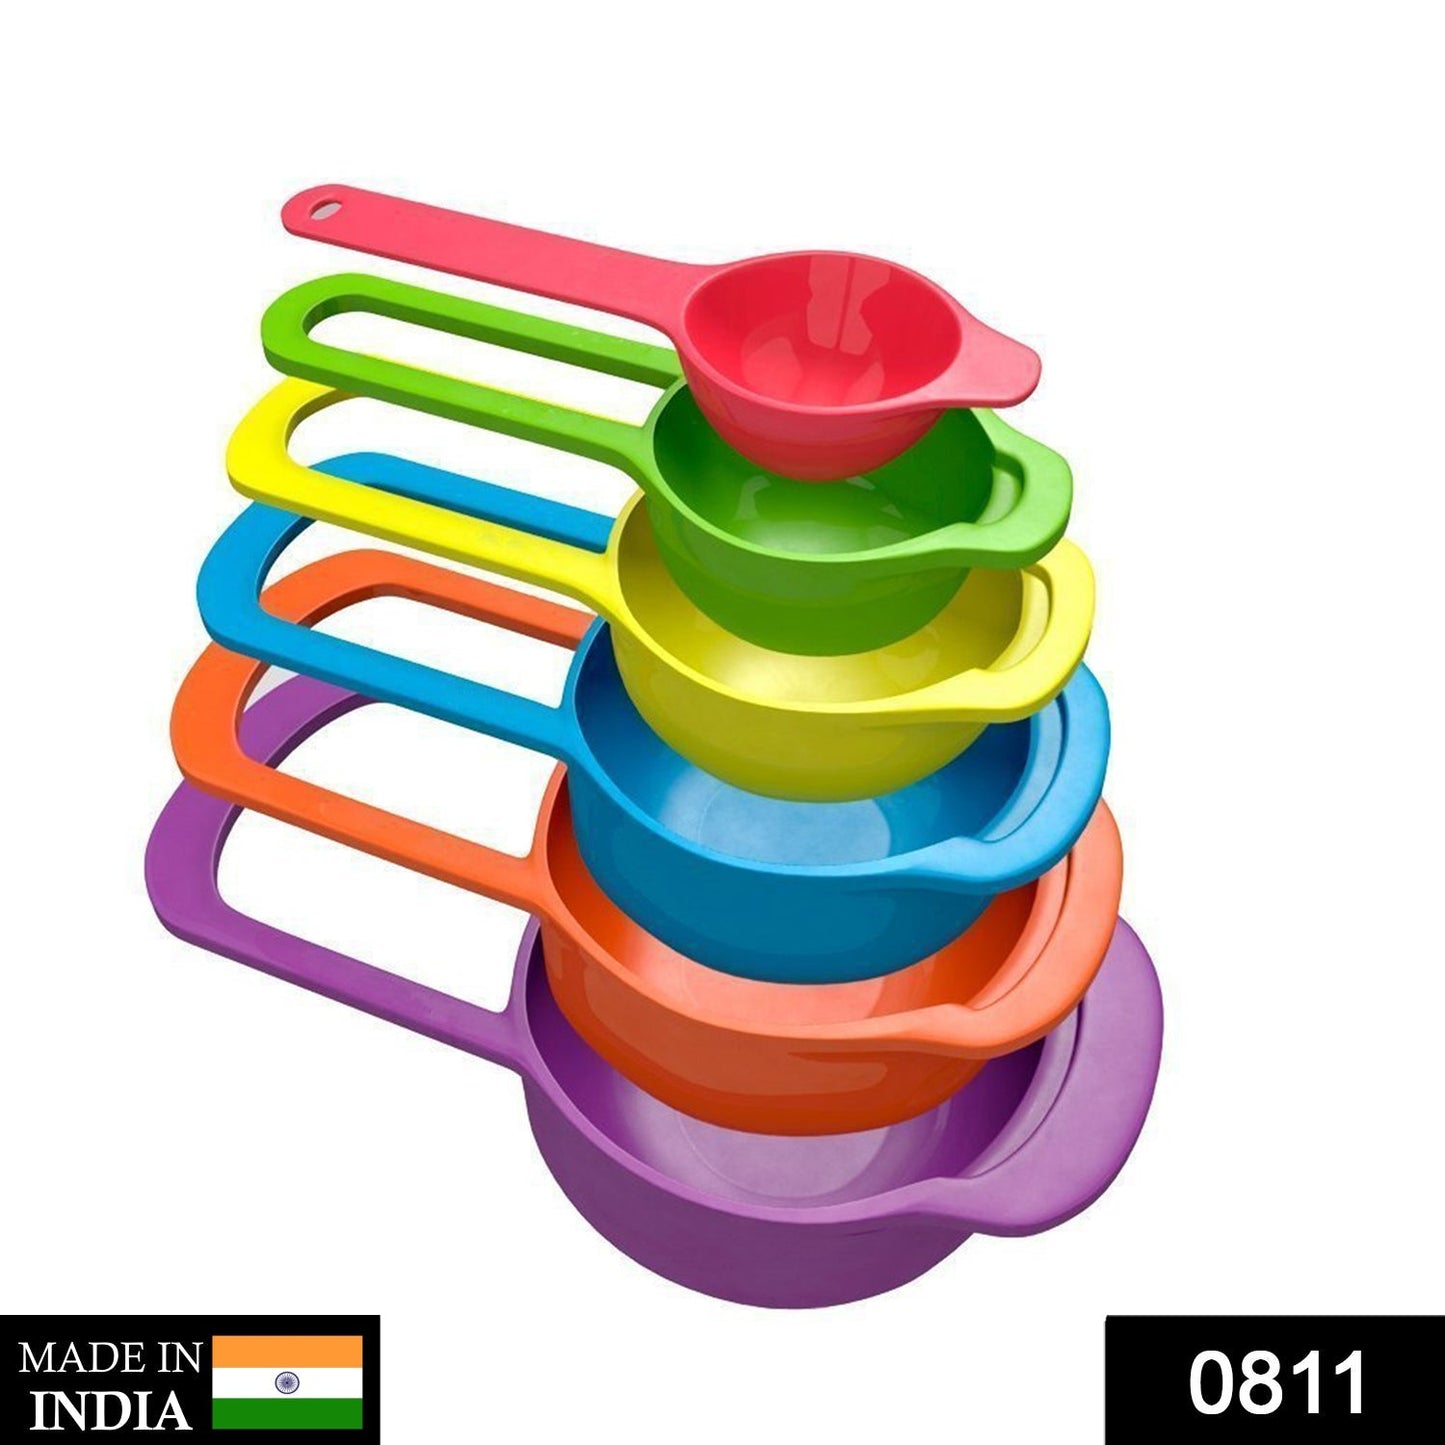 0811 Plastic Measuring Spoons for Kitchen (6 pack) Dukandaily